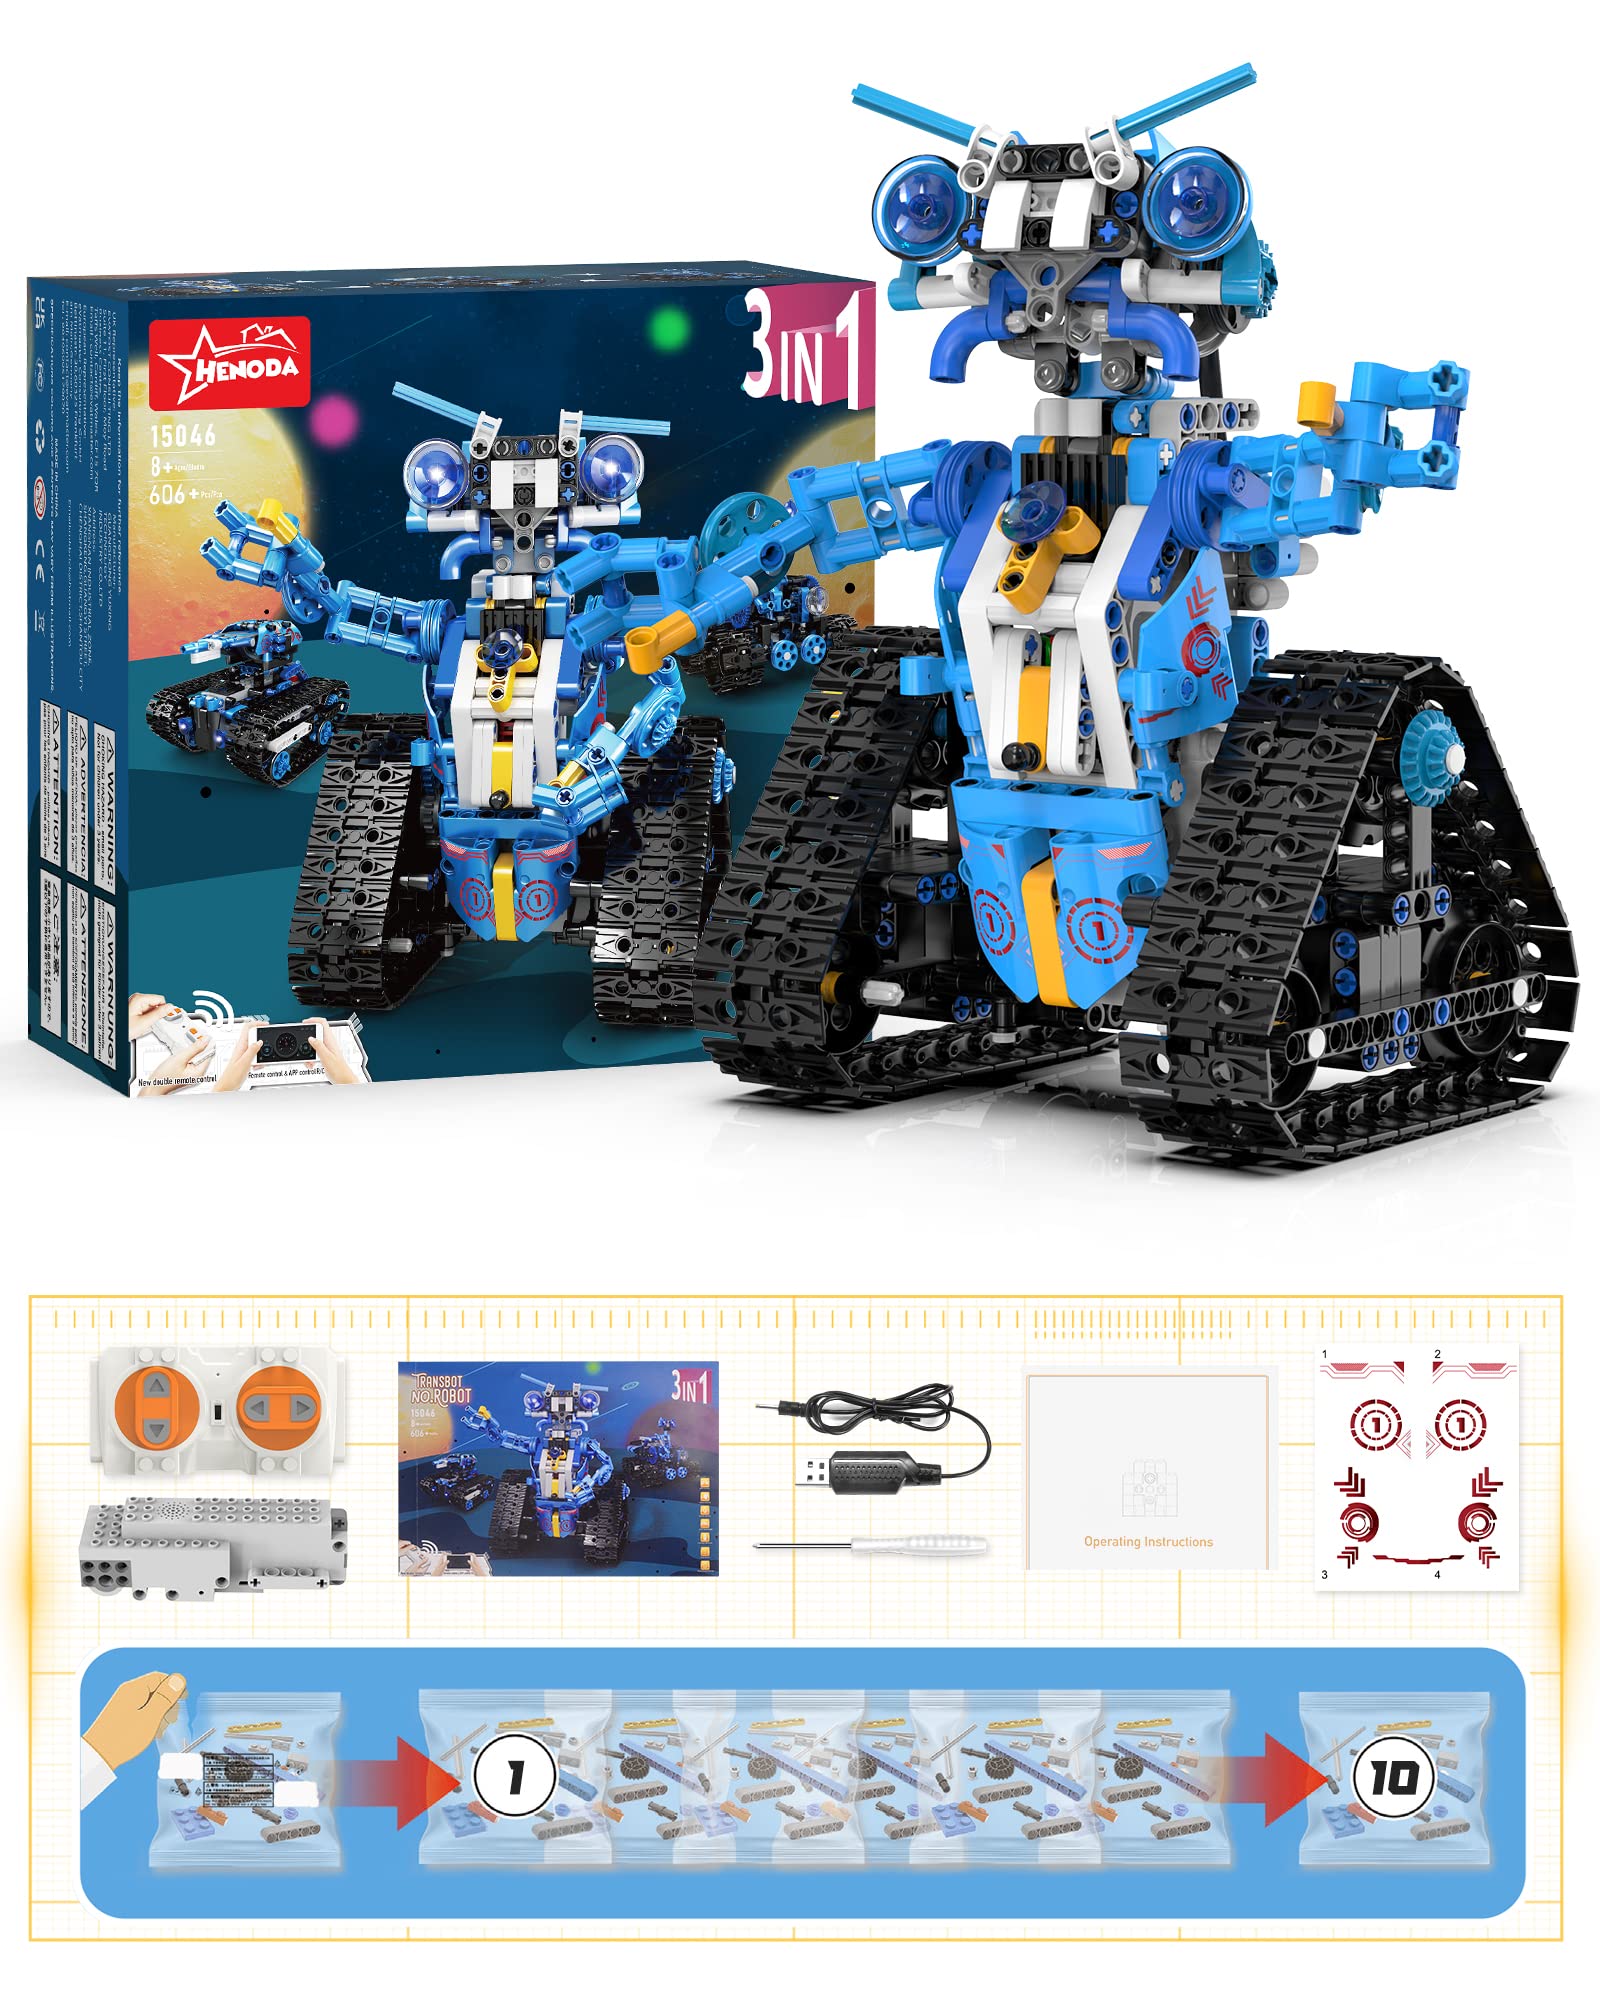 Henoda STEM Projects for Kids Ages 8-12, 3 in 1 APP Remote Control Car/Programmable Robot/Tank Transformer Toys for Teenage, Building Block Science Kit Educational Birthday Gift for Boys Girls 9-16